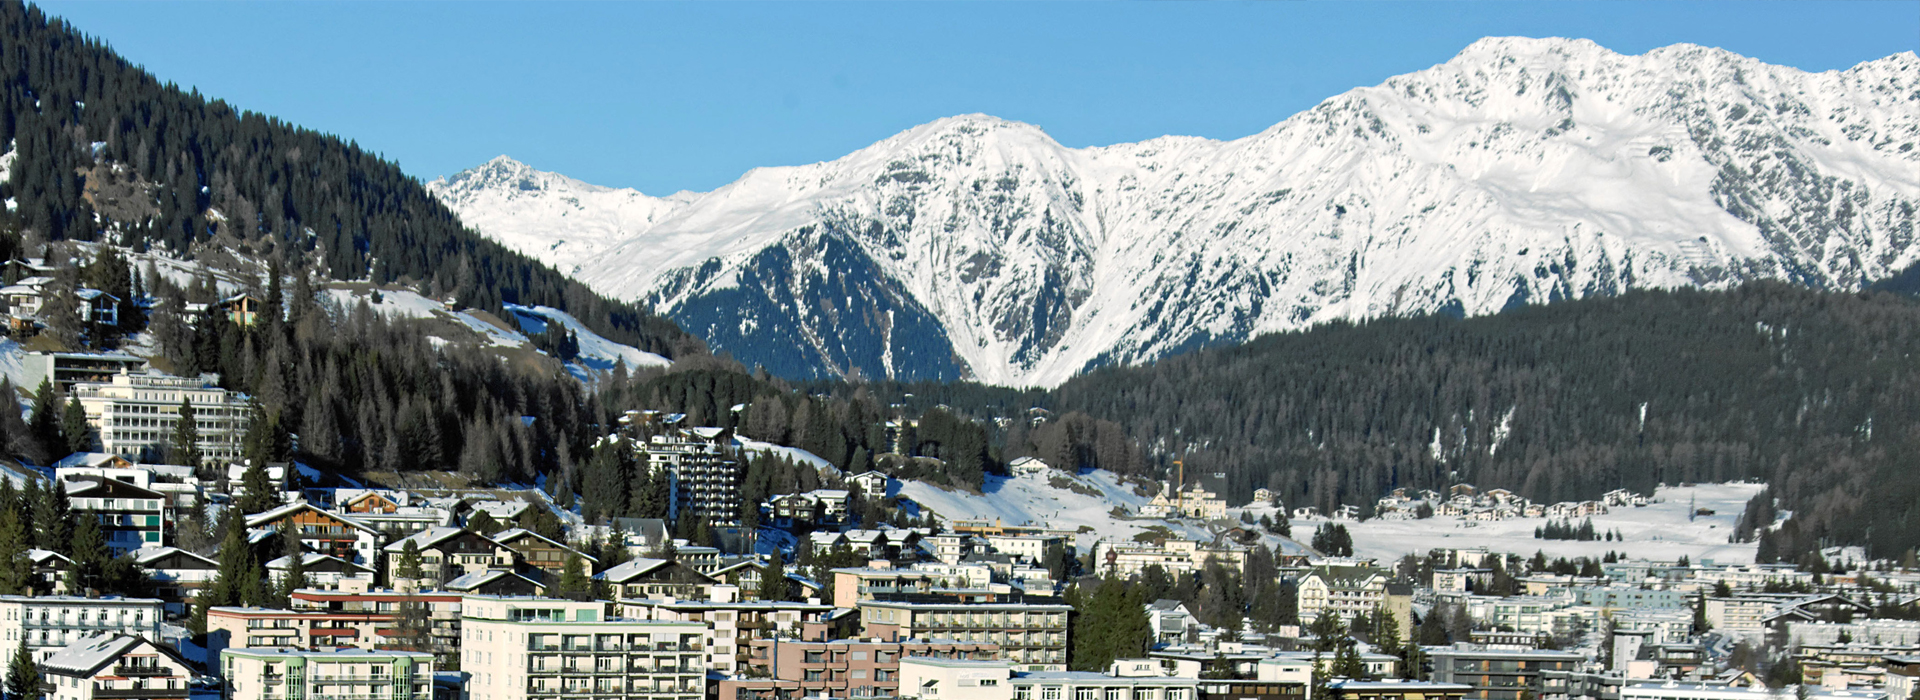 How to get to Davos for Skiing